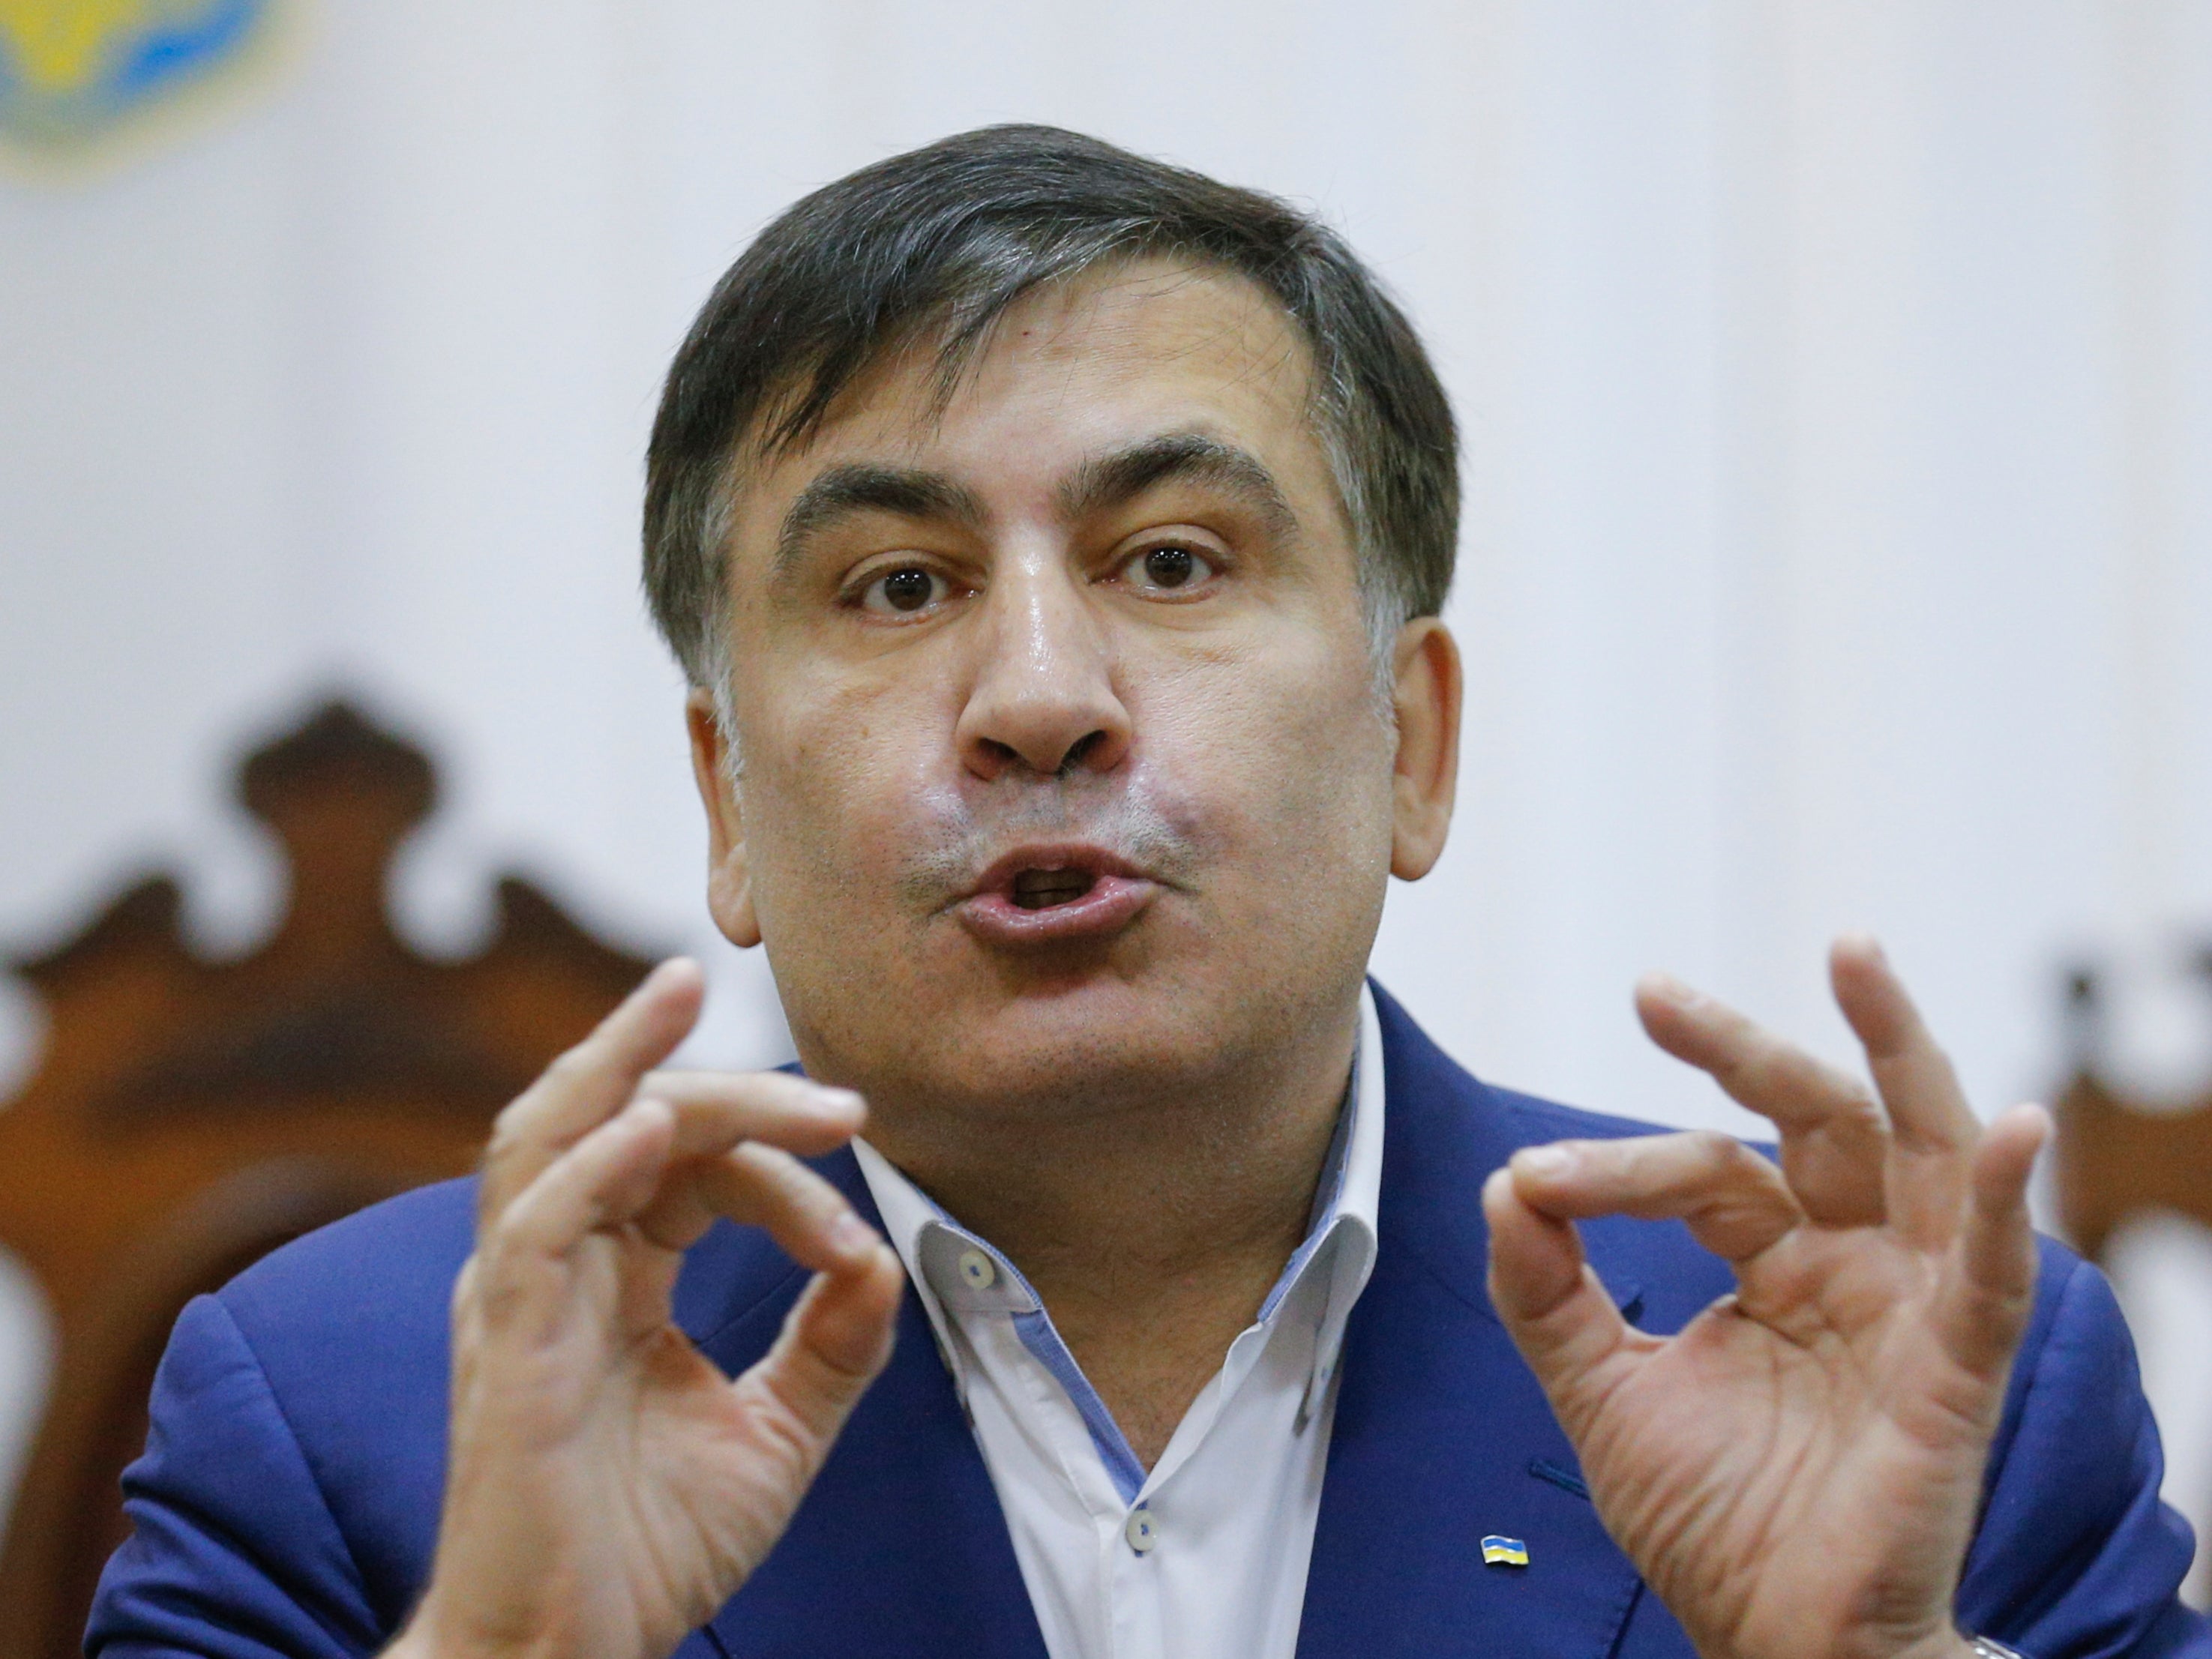 Mr Saakashvili had urged supporters to vote for anyone other than the ruling Georgian Dream party in the local elections